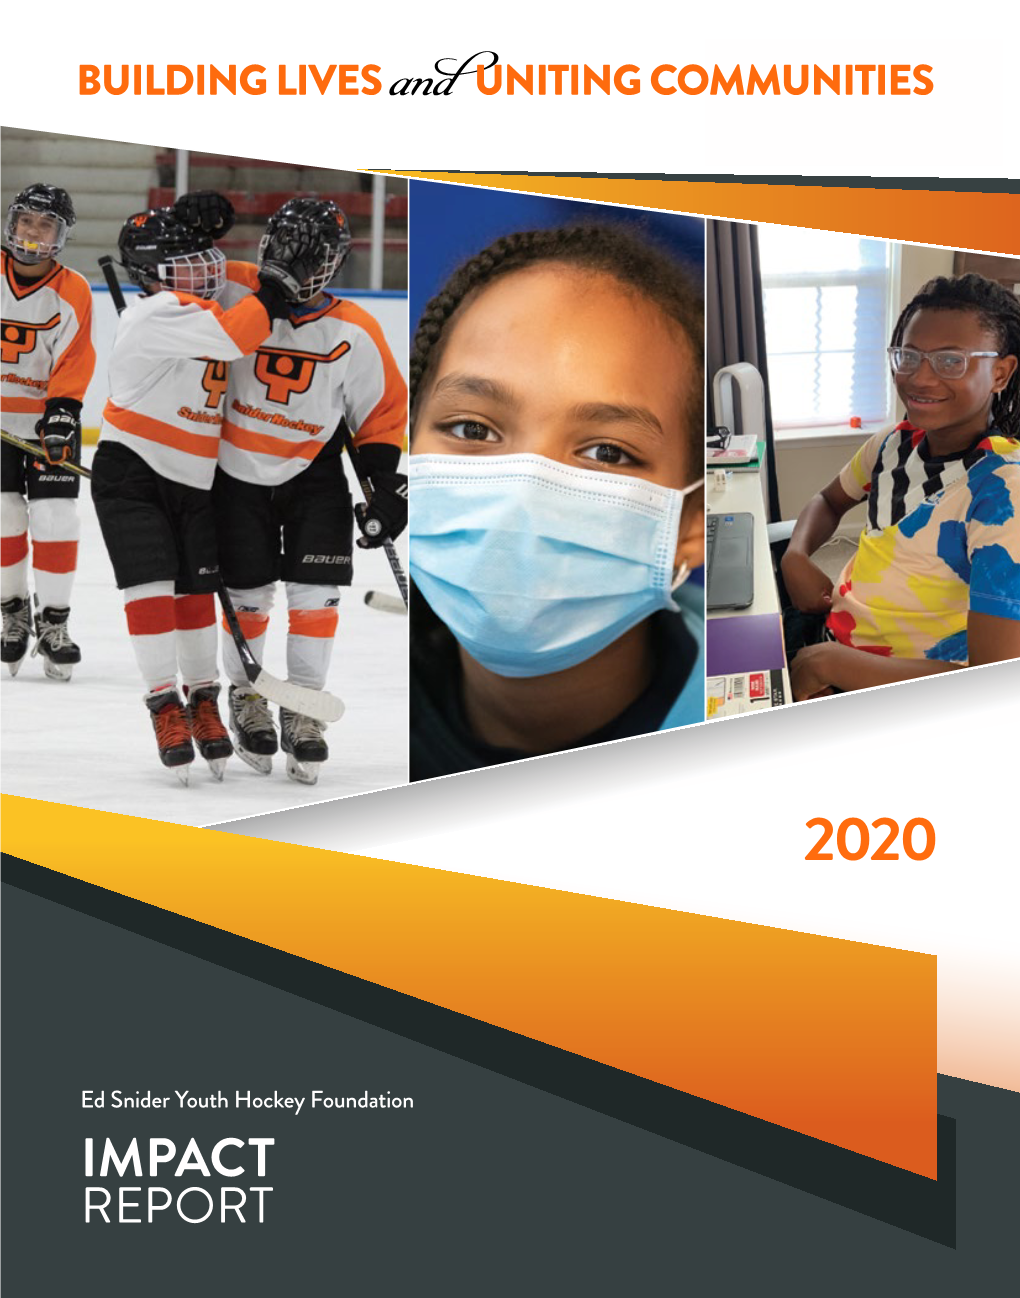 2020 Impact Report: Lineup Thrive When Challenged